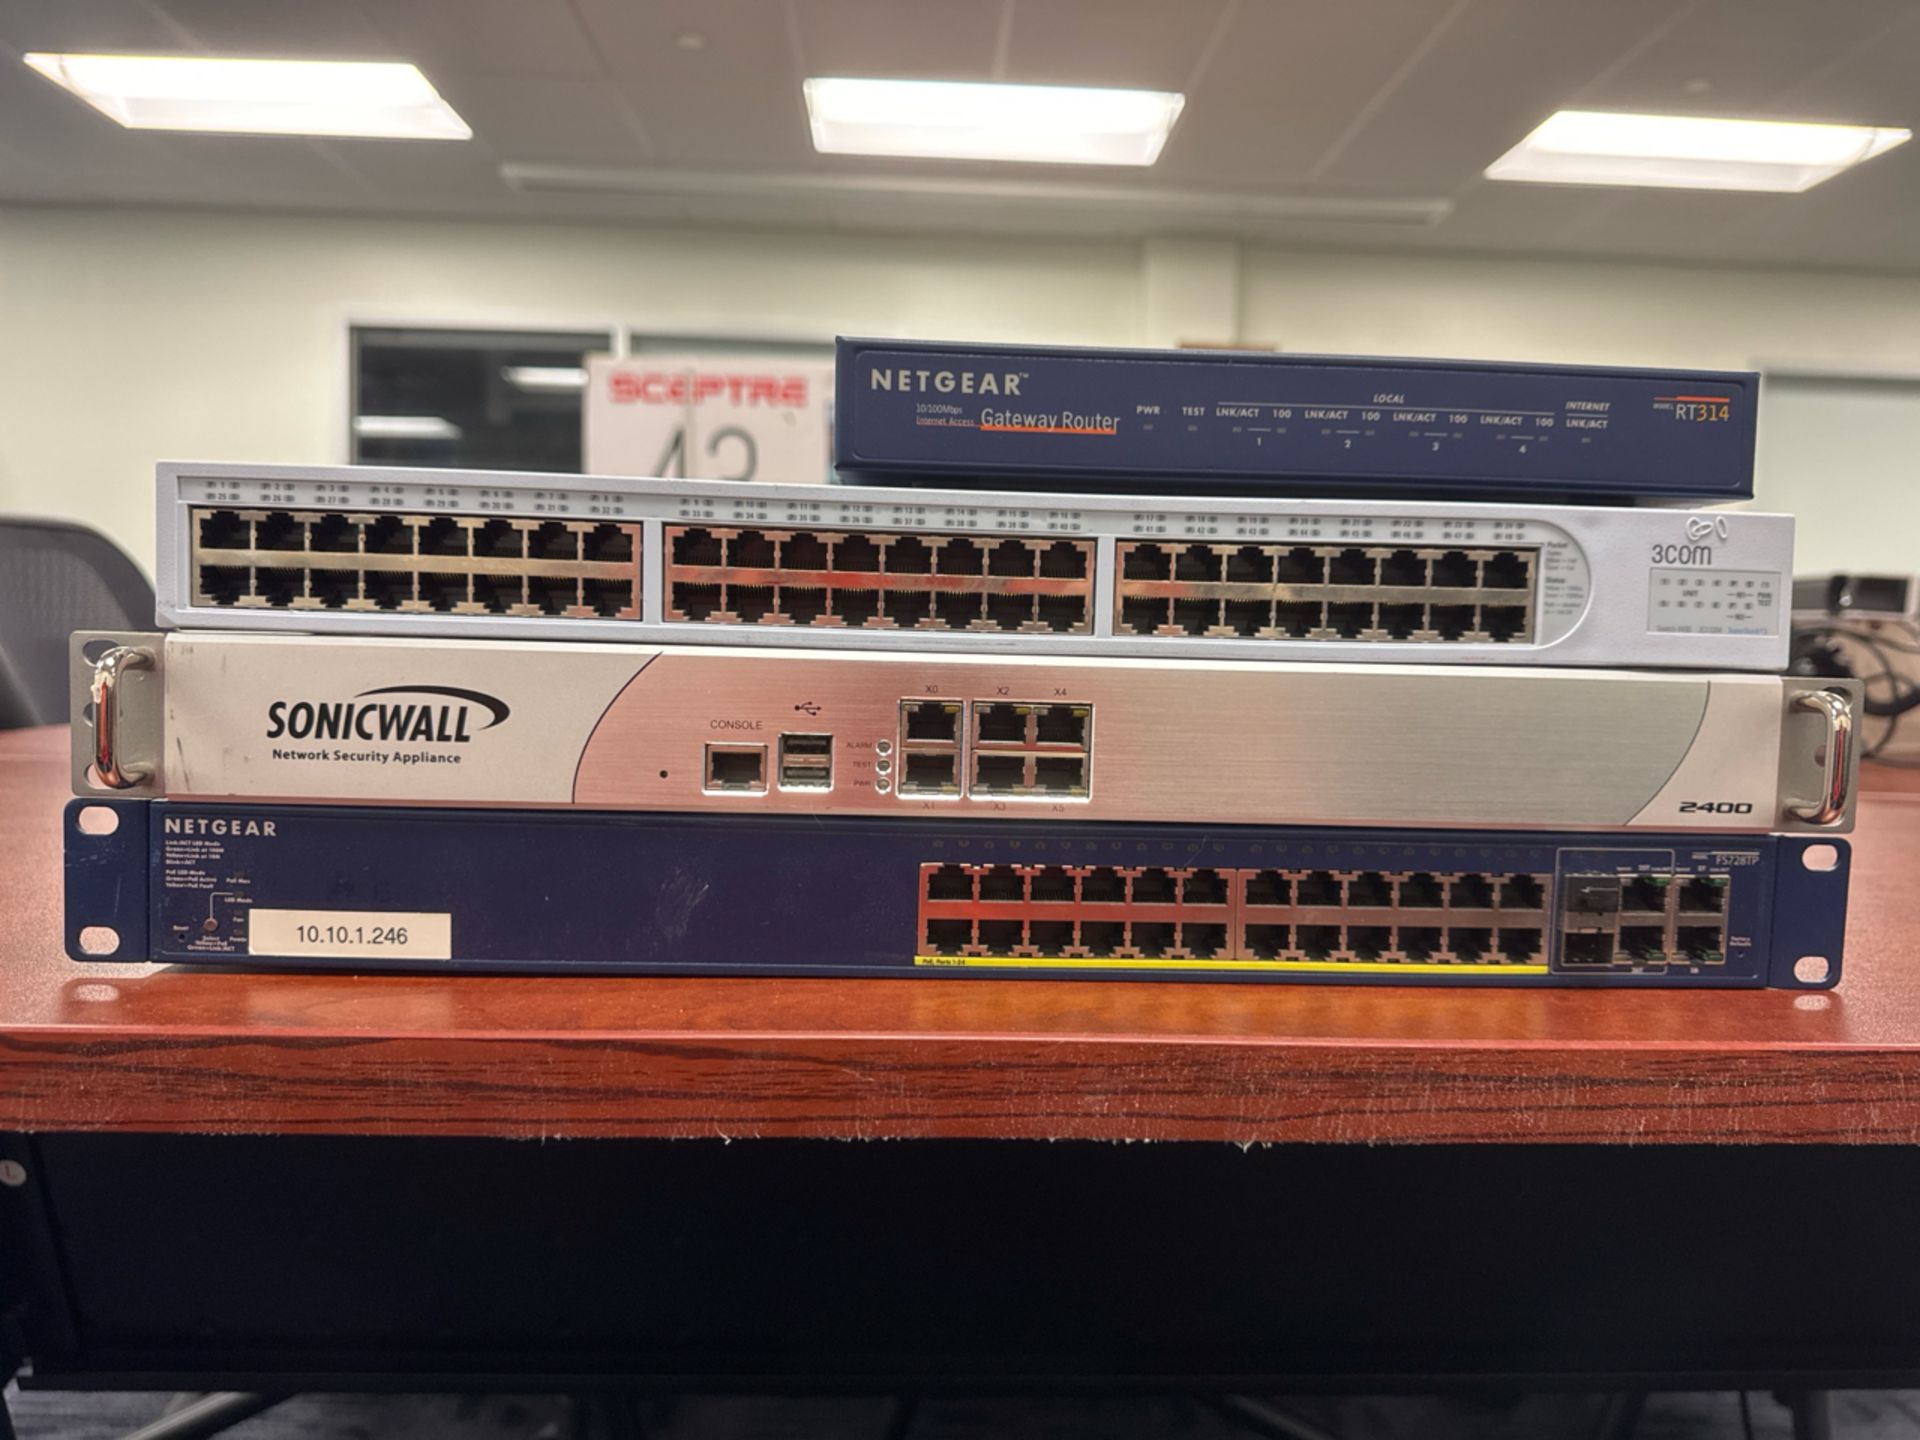 TUV Network Switch, (2) Netgear Network Switches, & Sonicwall Network Switch Boards